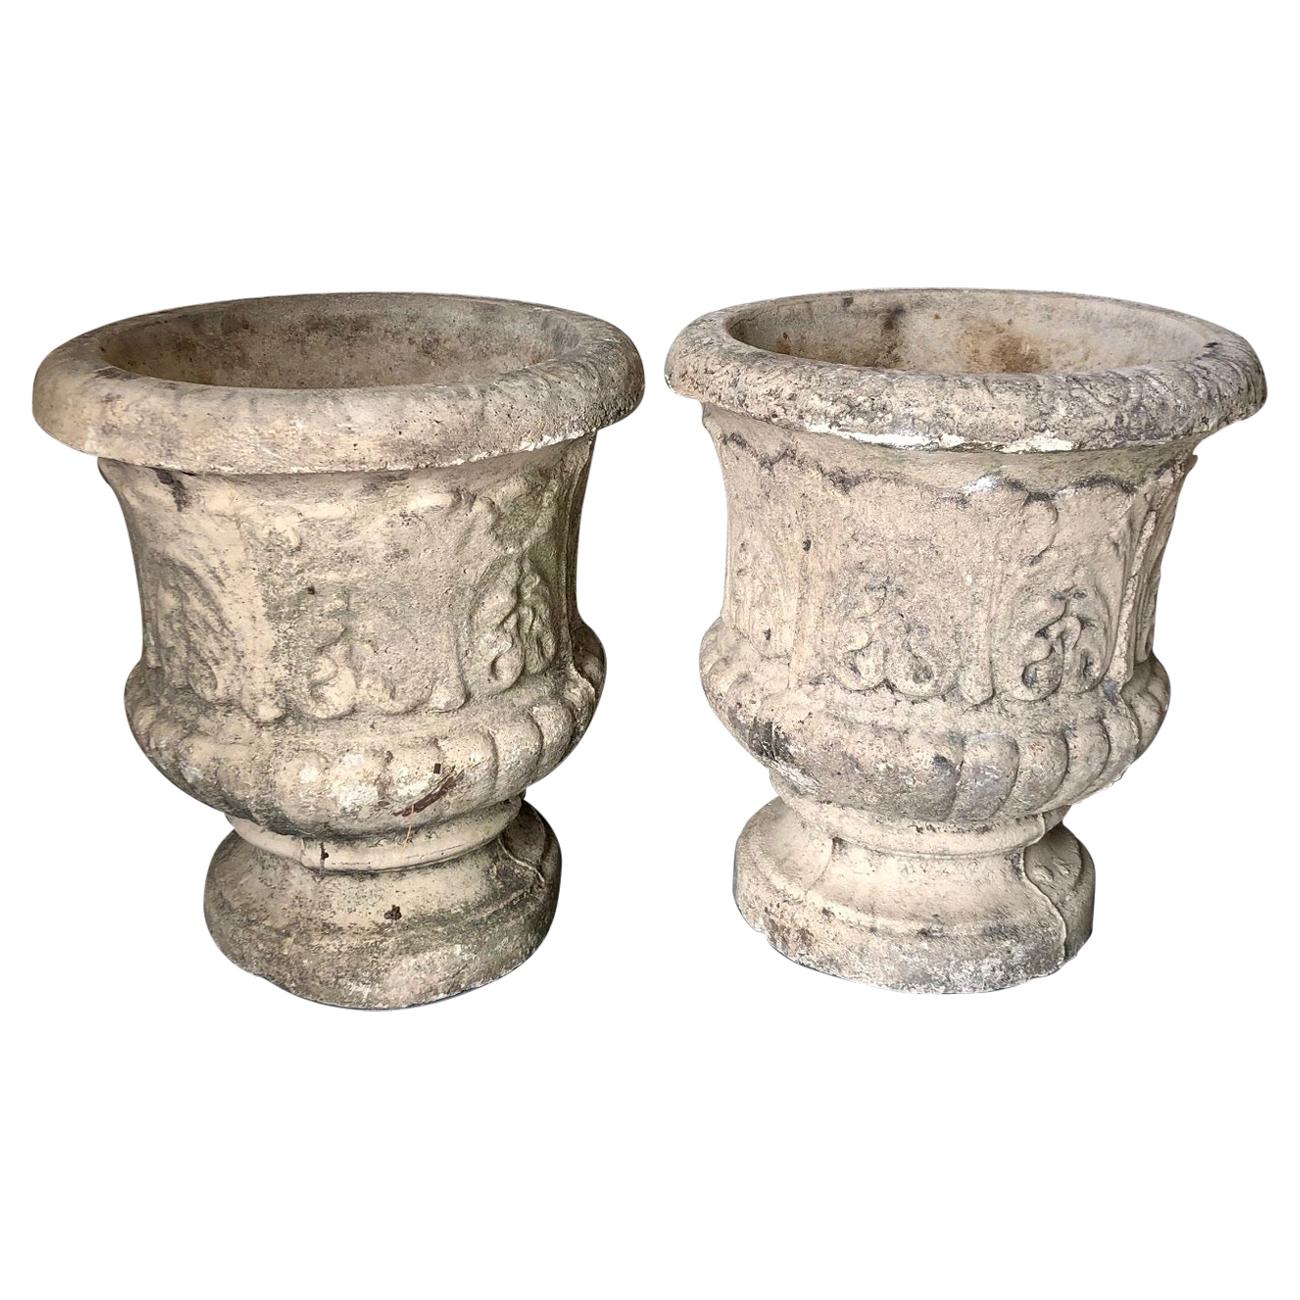 Pair of Classic Cast Stone Garden Urns with Acanthus Leaf Scrollwork